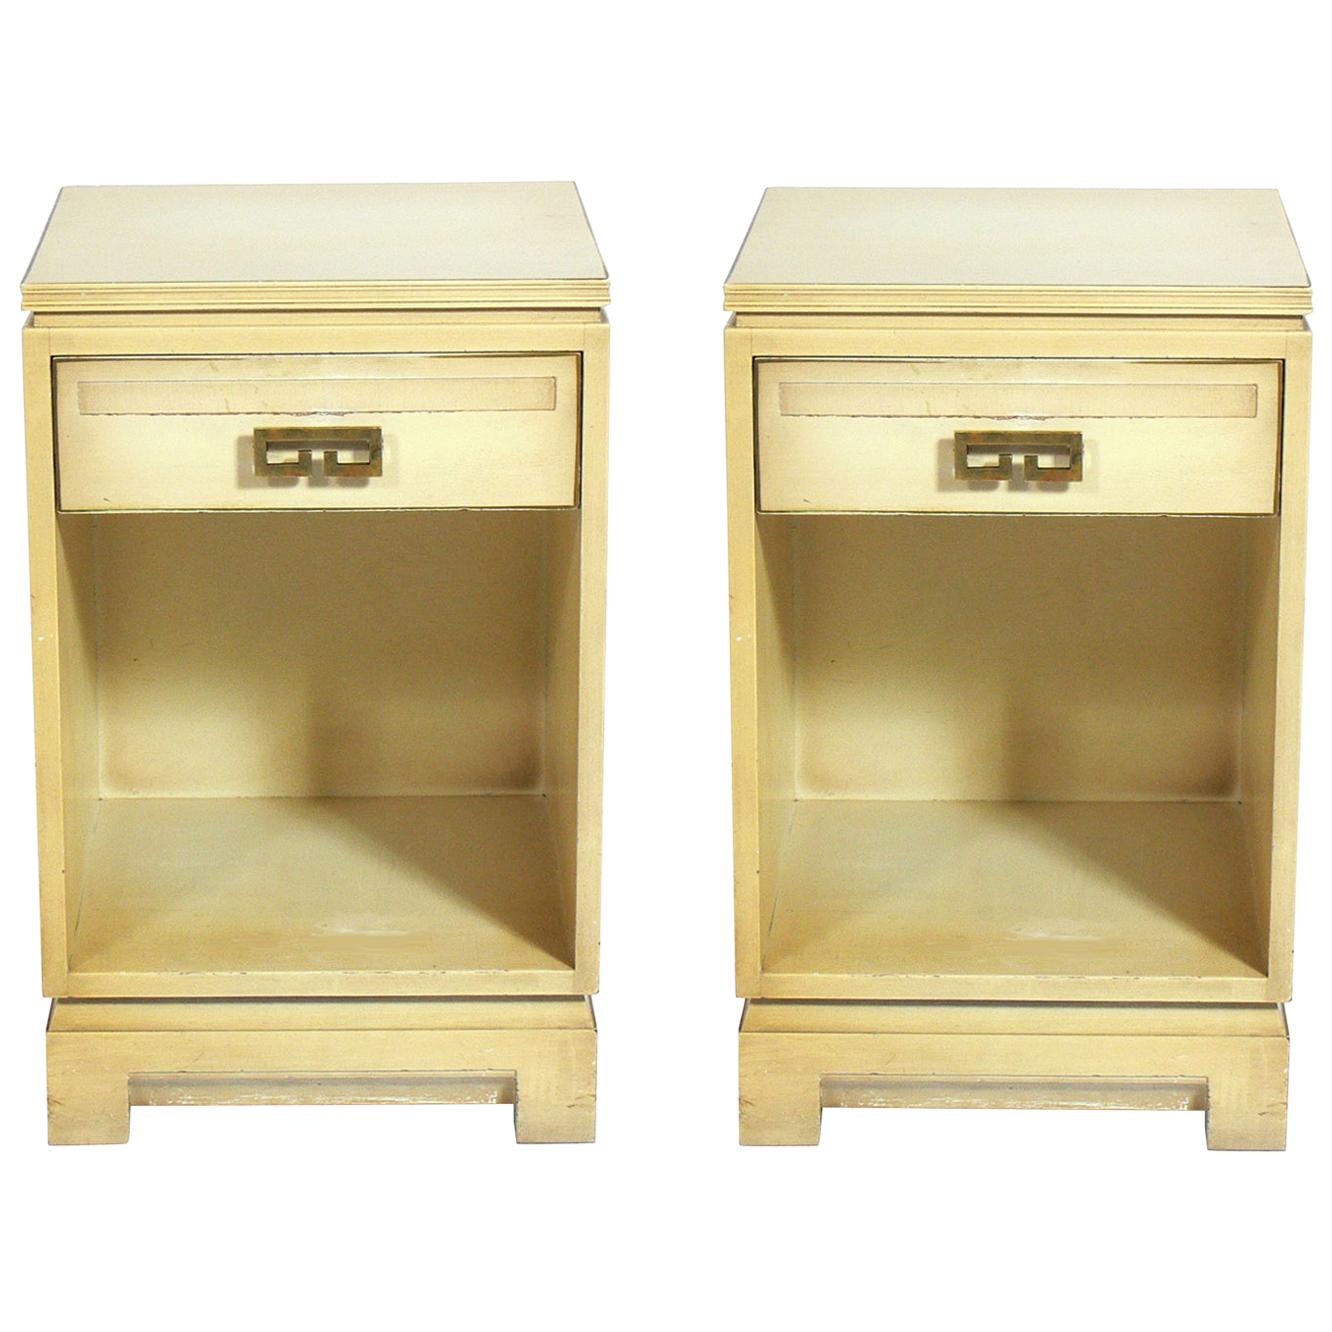 Chinoiserie Nightstands, in Your Choice of Color